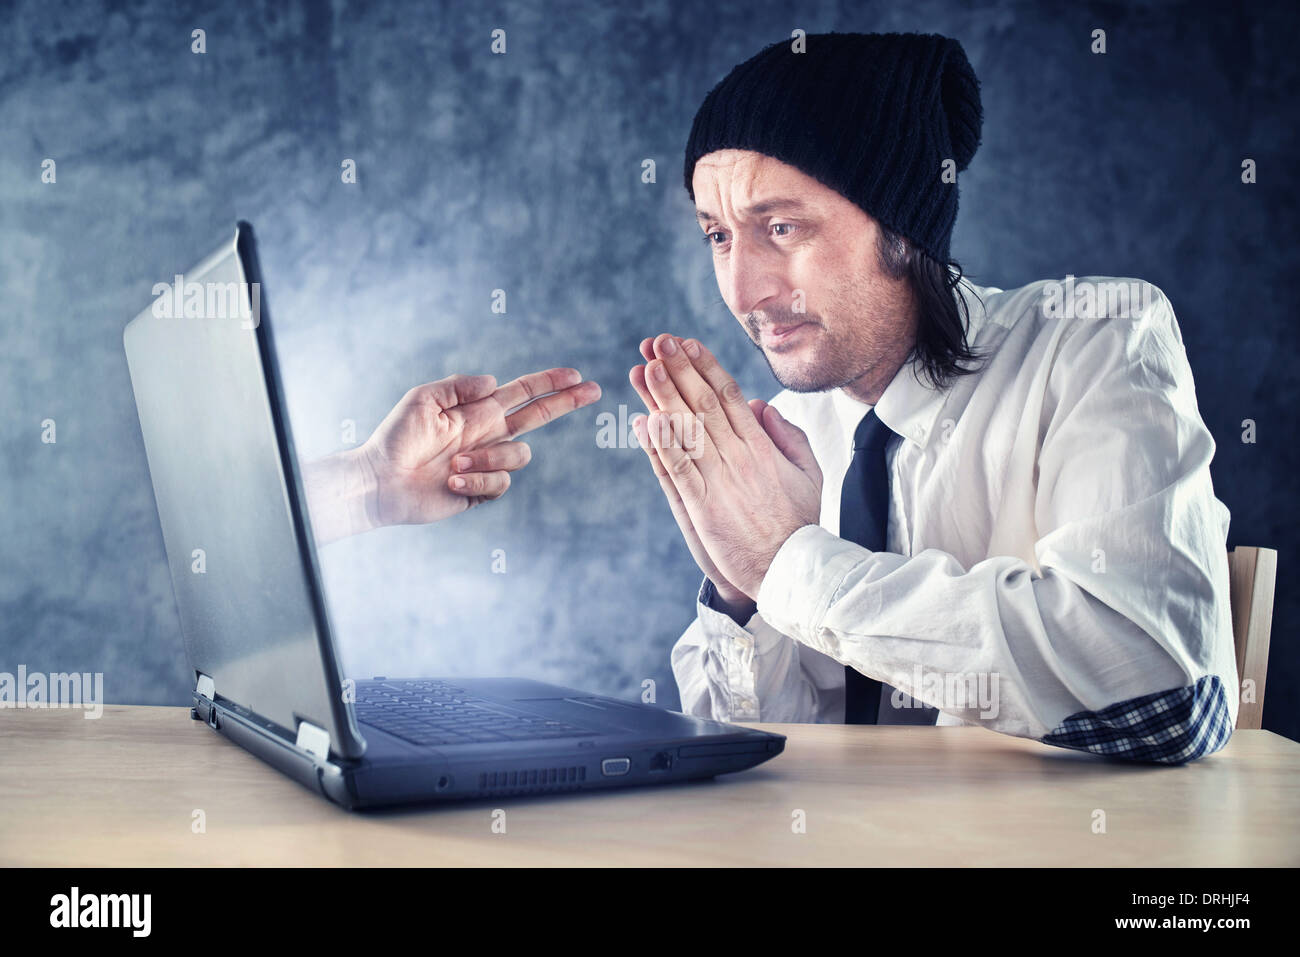 Online robbery. Businessman being robbed over internet while working on laptop computer. Stock Photo